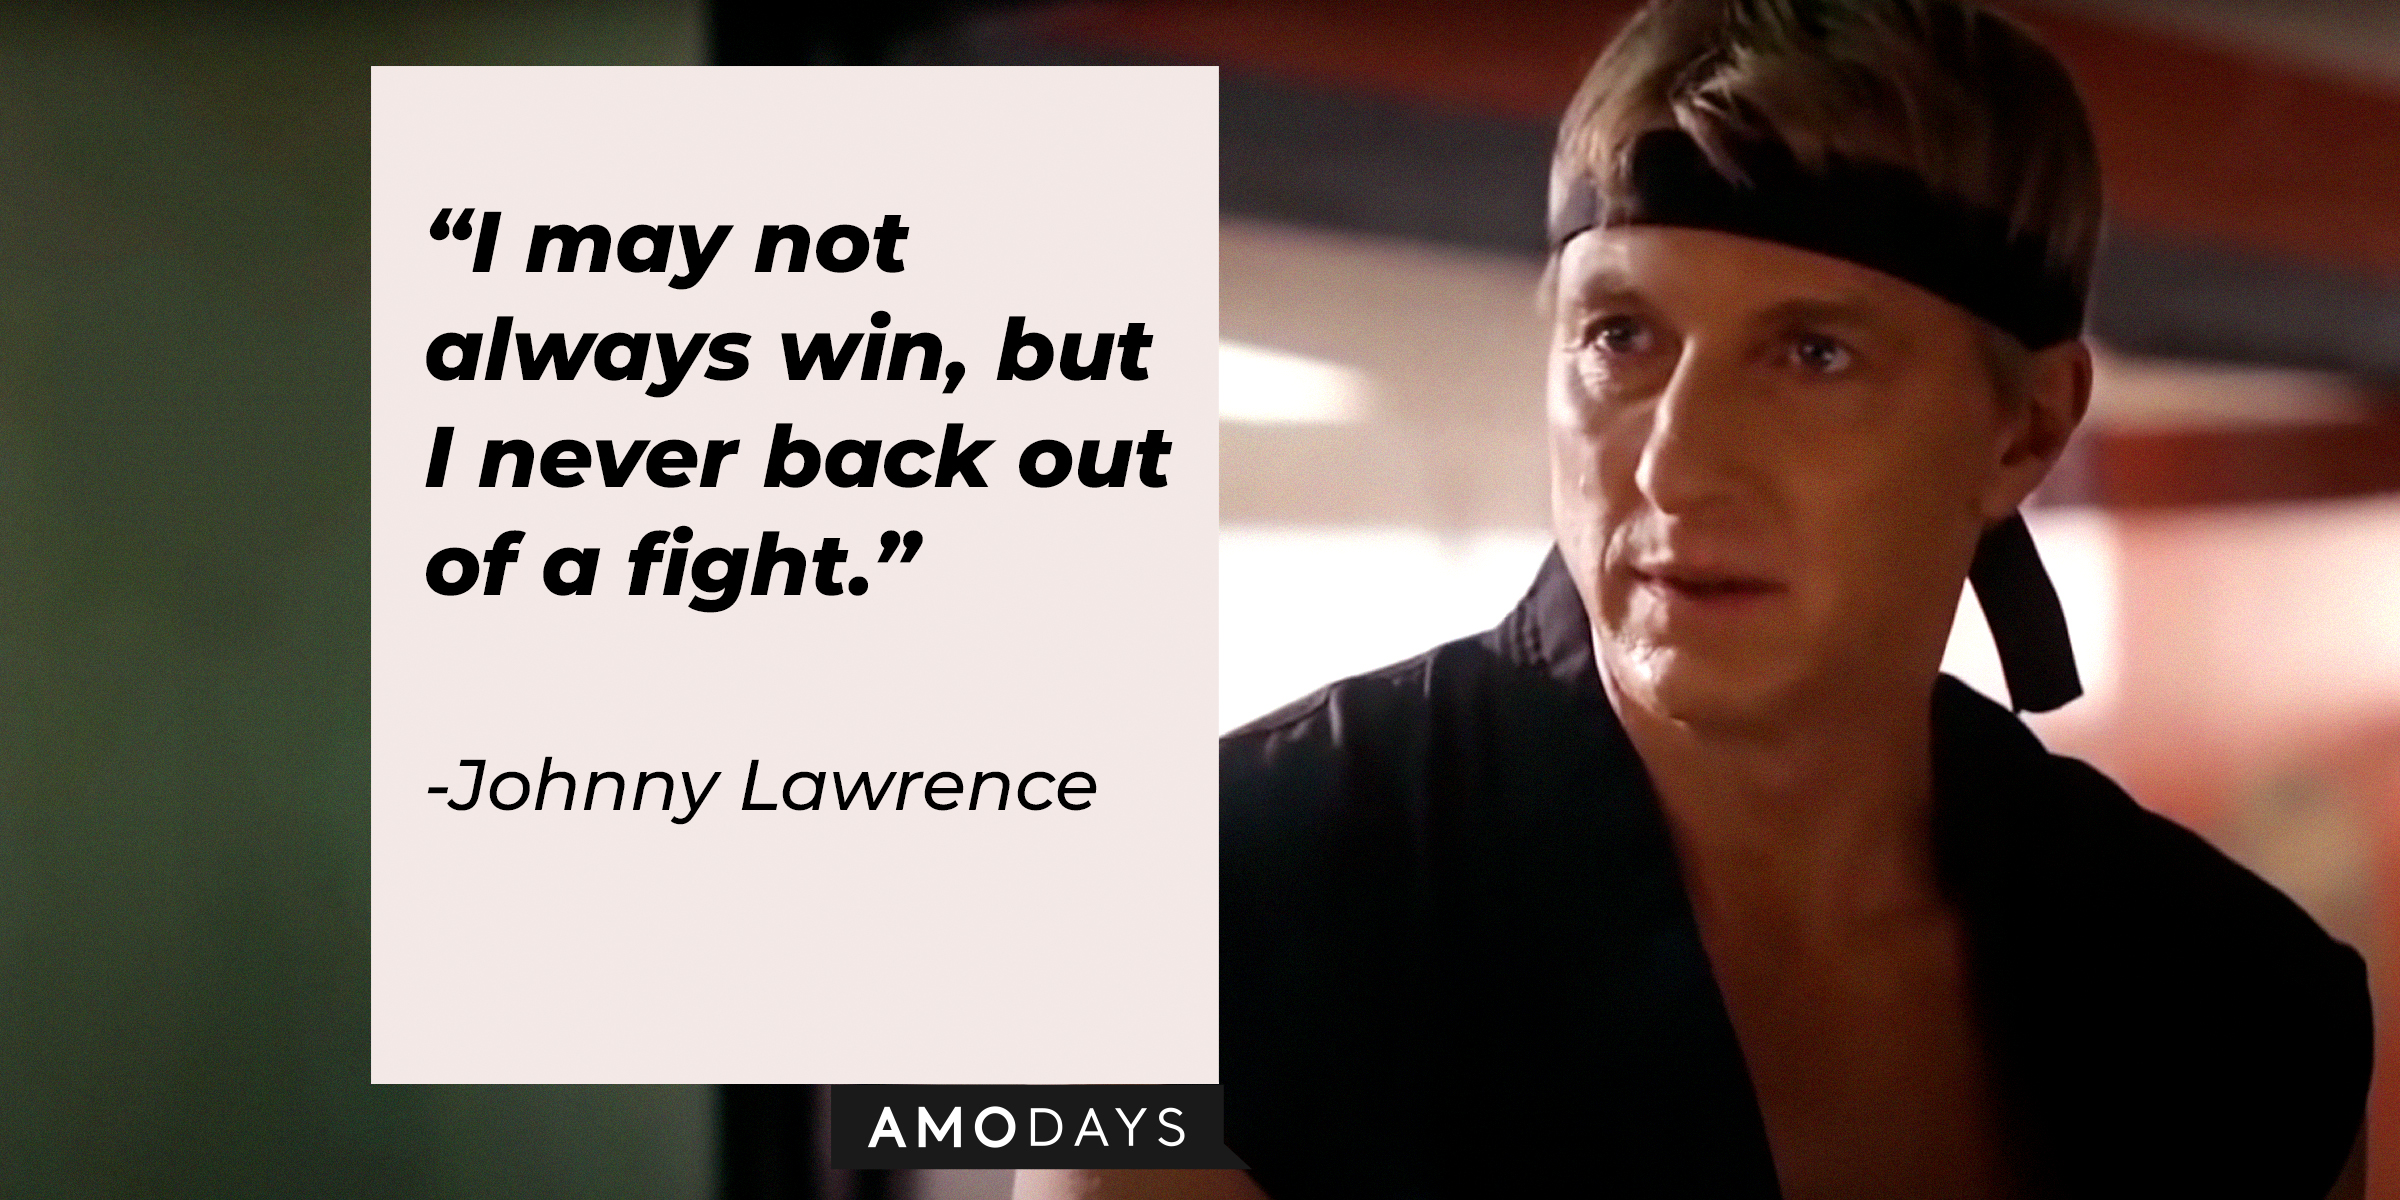 Johnny Lawrence, with his quote: “I may not always win, but I never back out of a fight." | Source: facebook.com/CobraKaiSeries